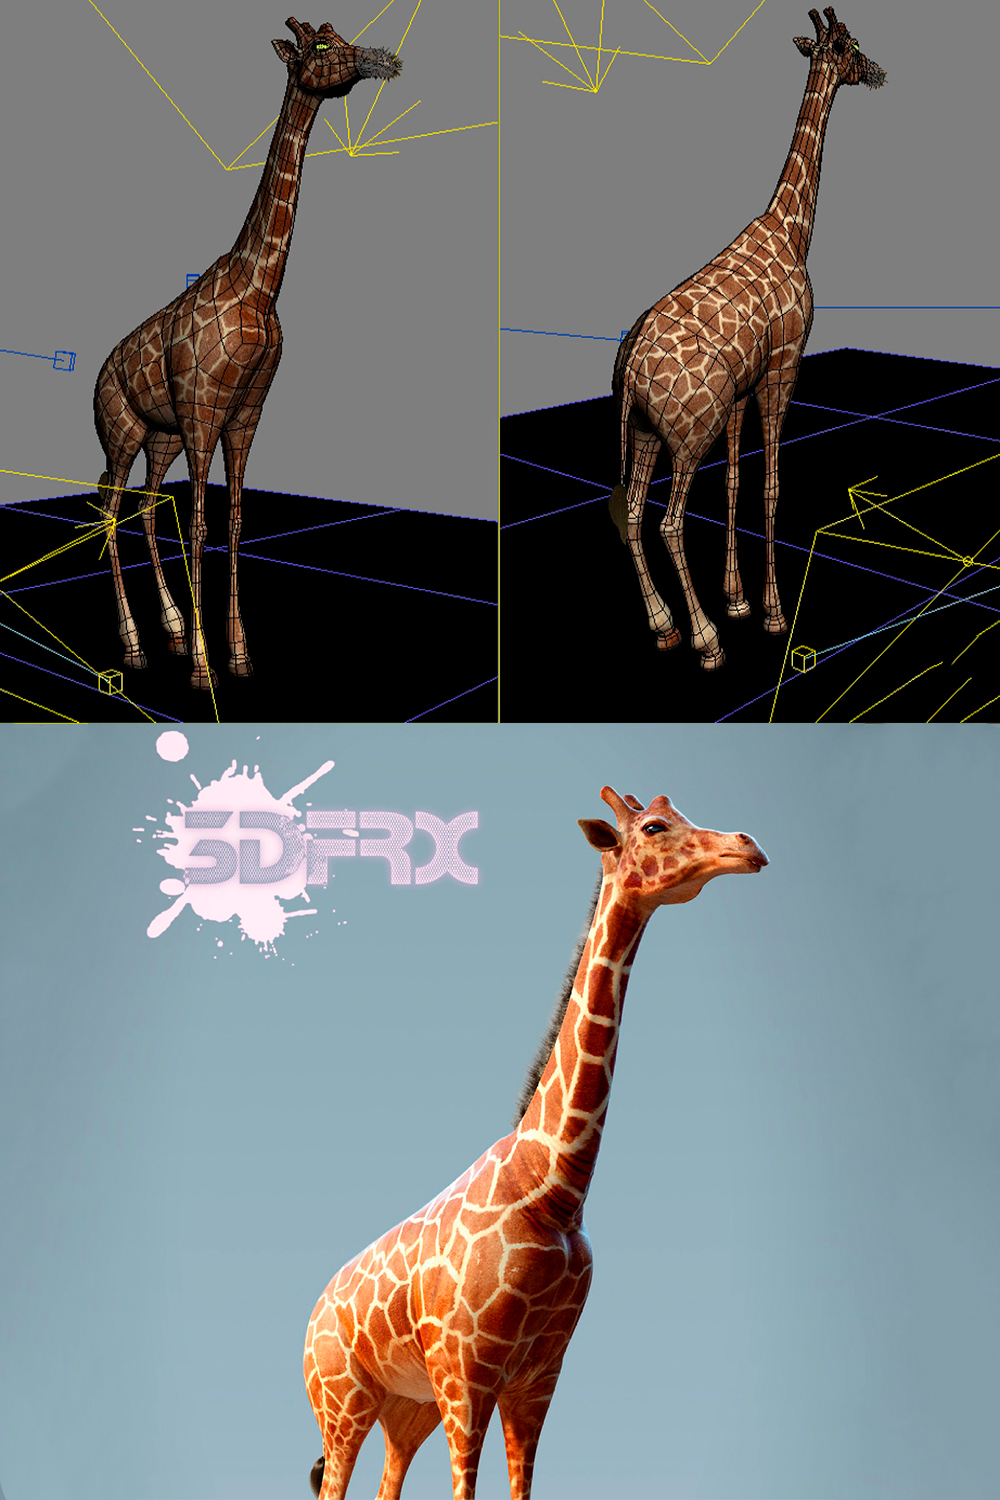 Rendering of a colorful 3d model of a giraffe